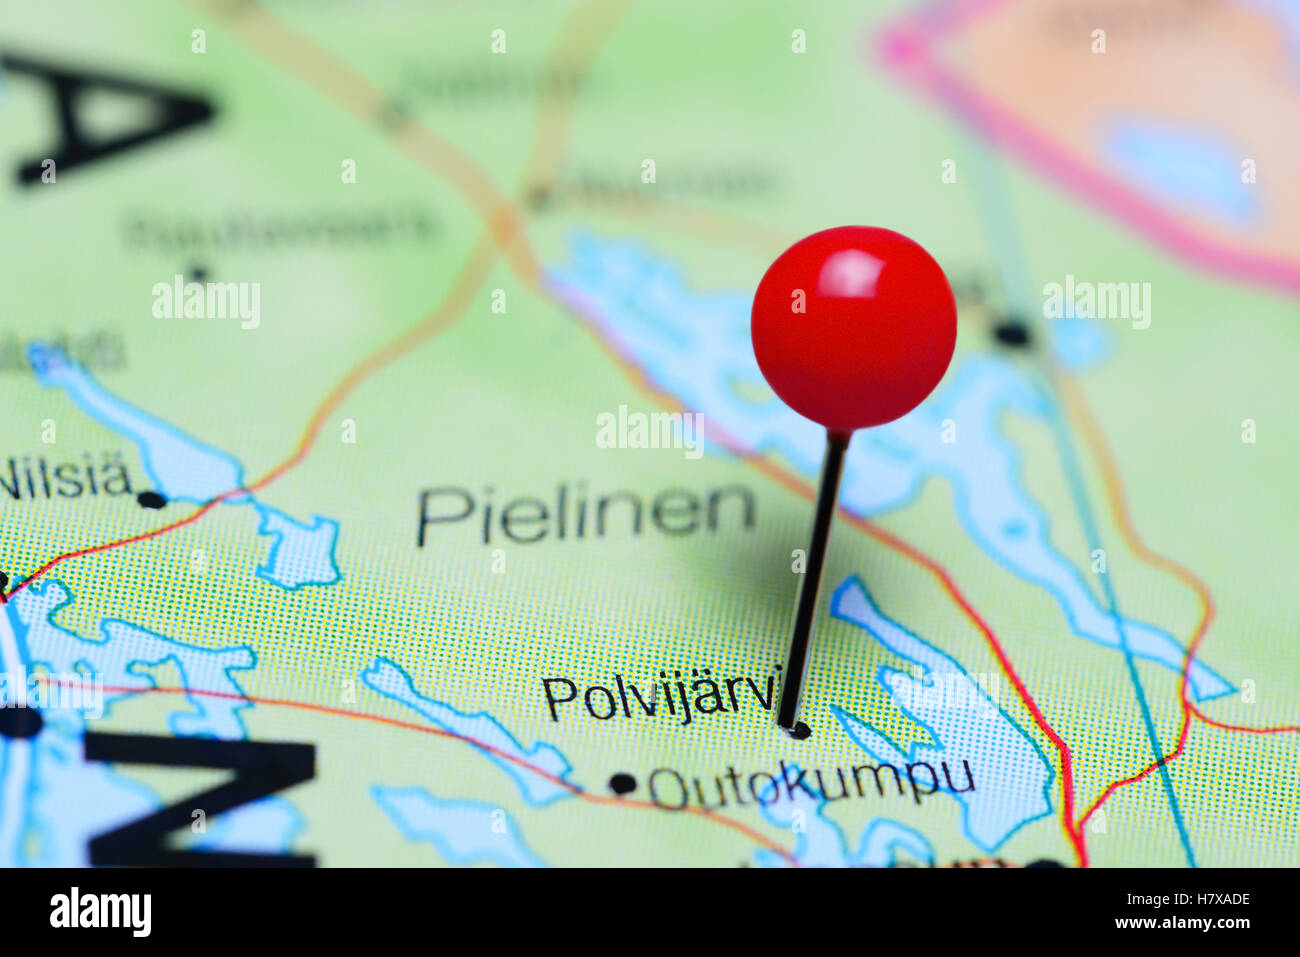 Polvijarvi pinned on a map of Finland Stock Photo